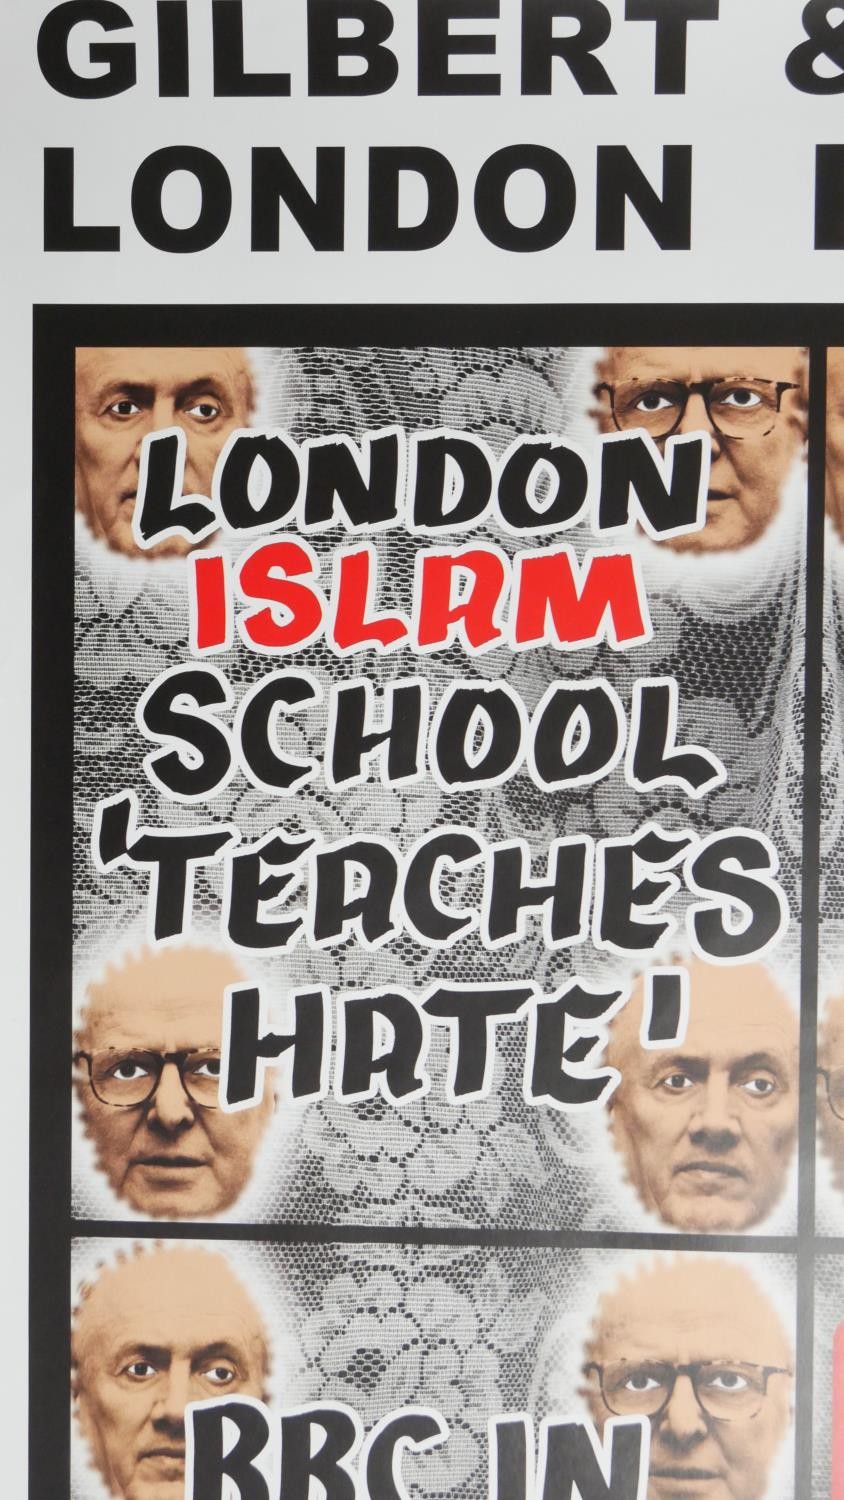 Gilbert & George, 20th century, White Cube, art exhibition poster for the artist show 'London - Image 5 of 7